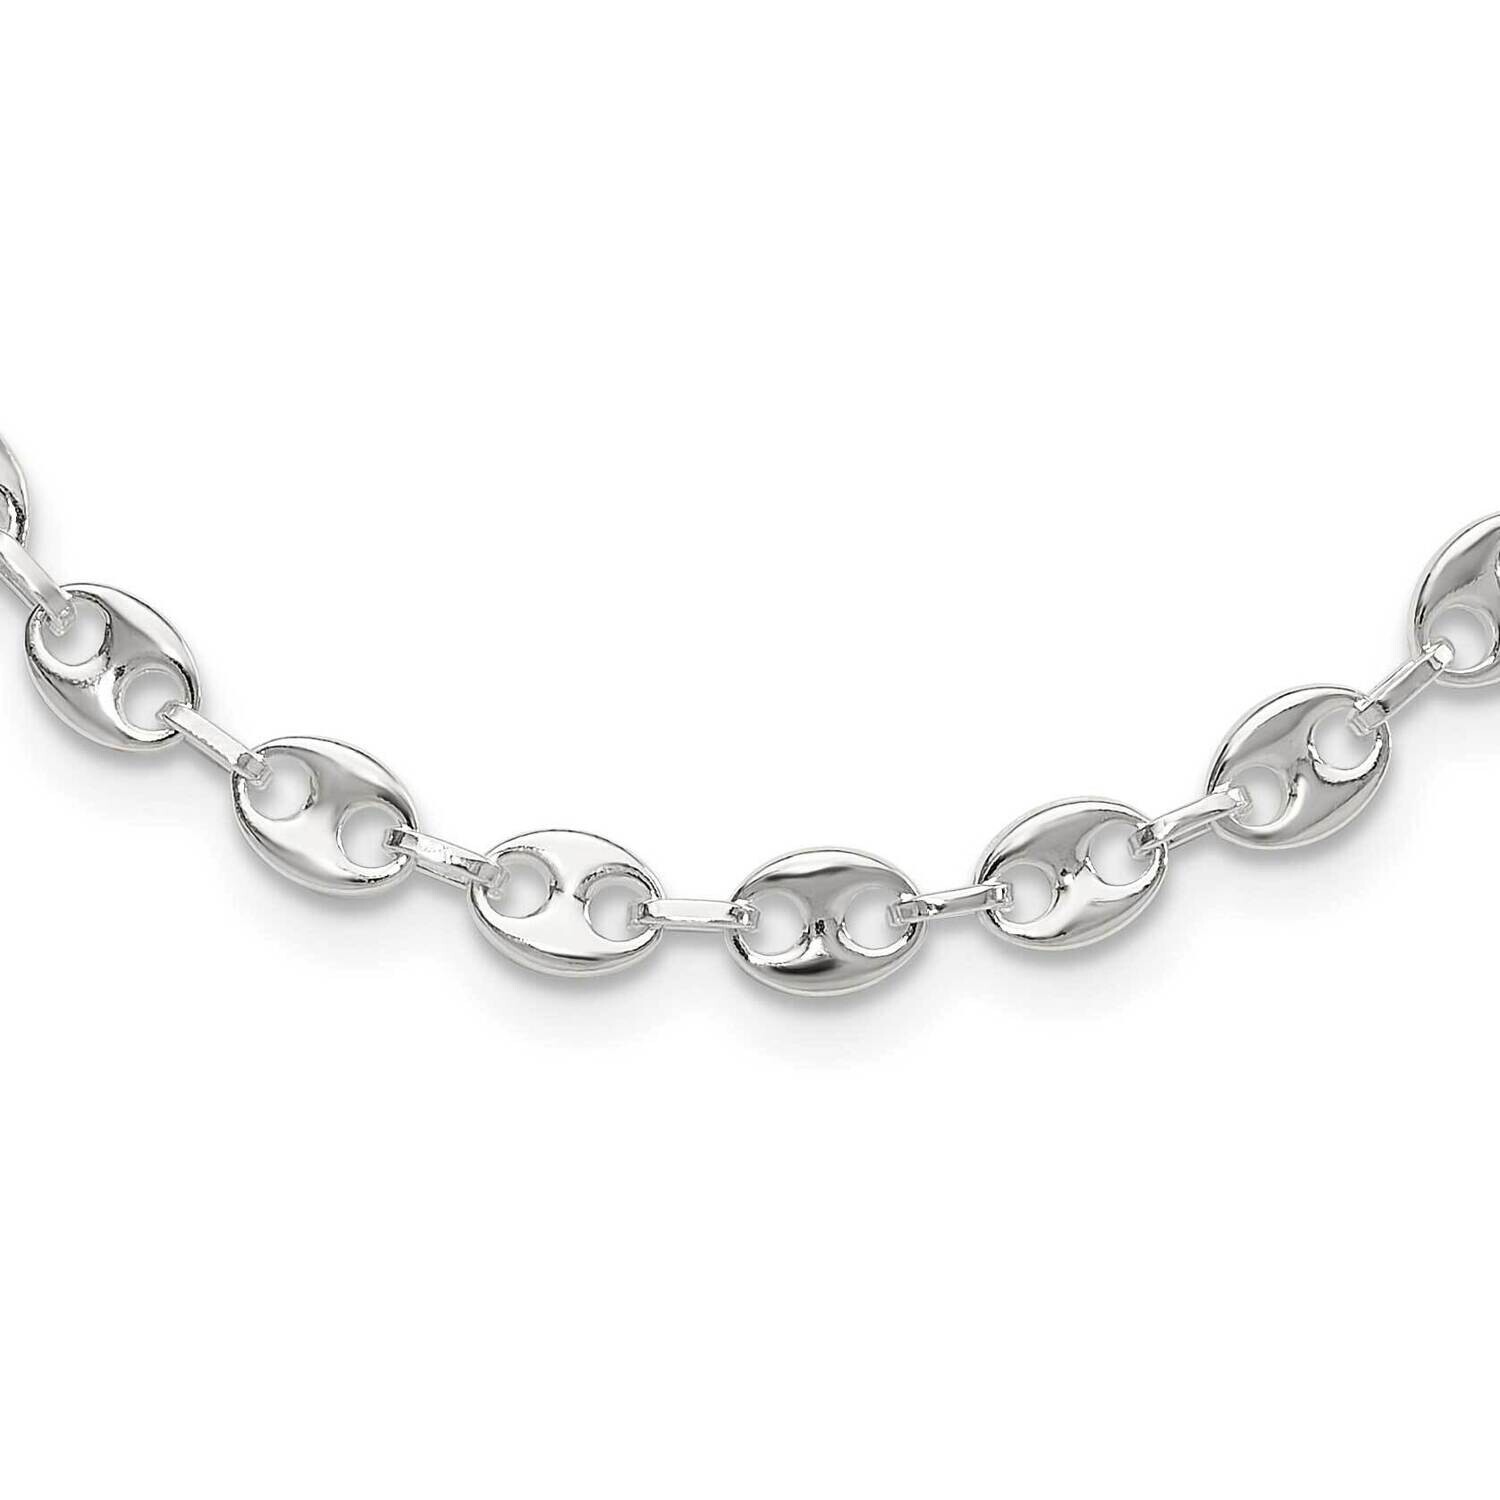 16 Inch 2 Inch Extender Fancy Link Necklace Sterling Silver Rhodium-Plated QG6503-16